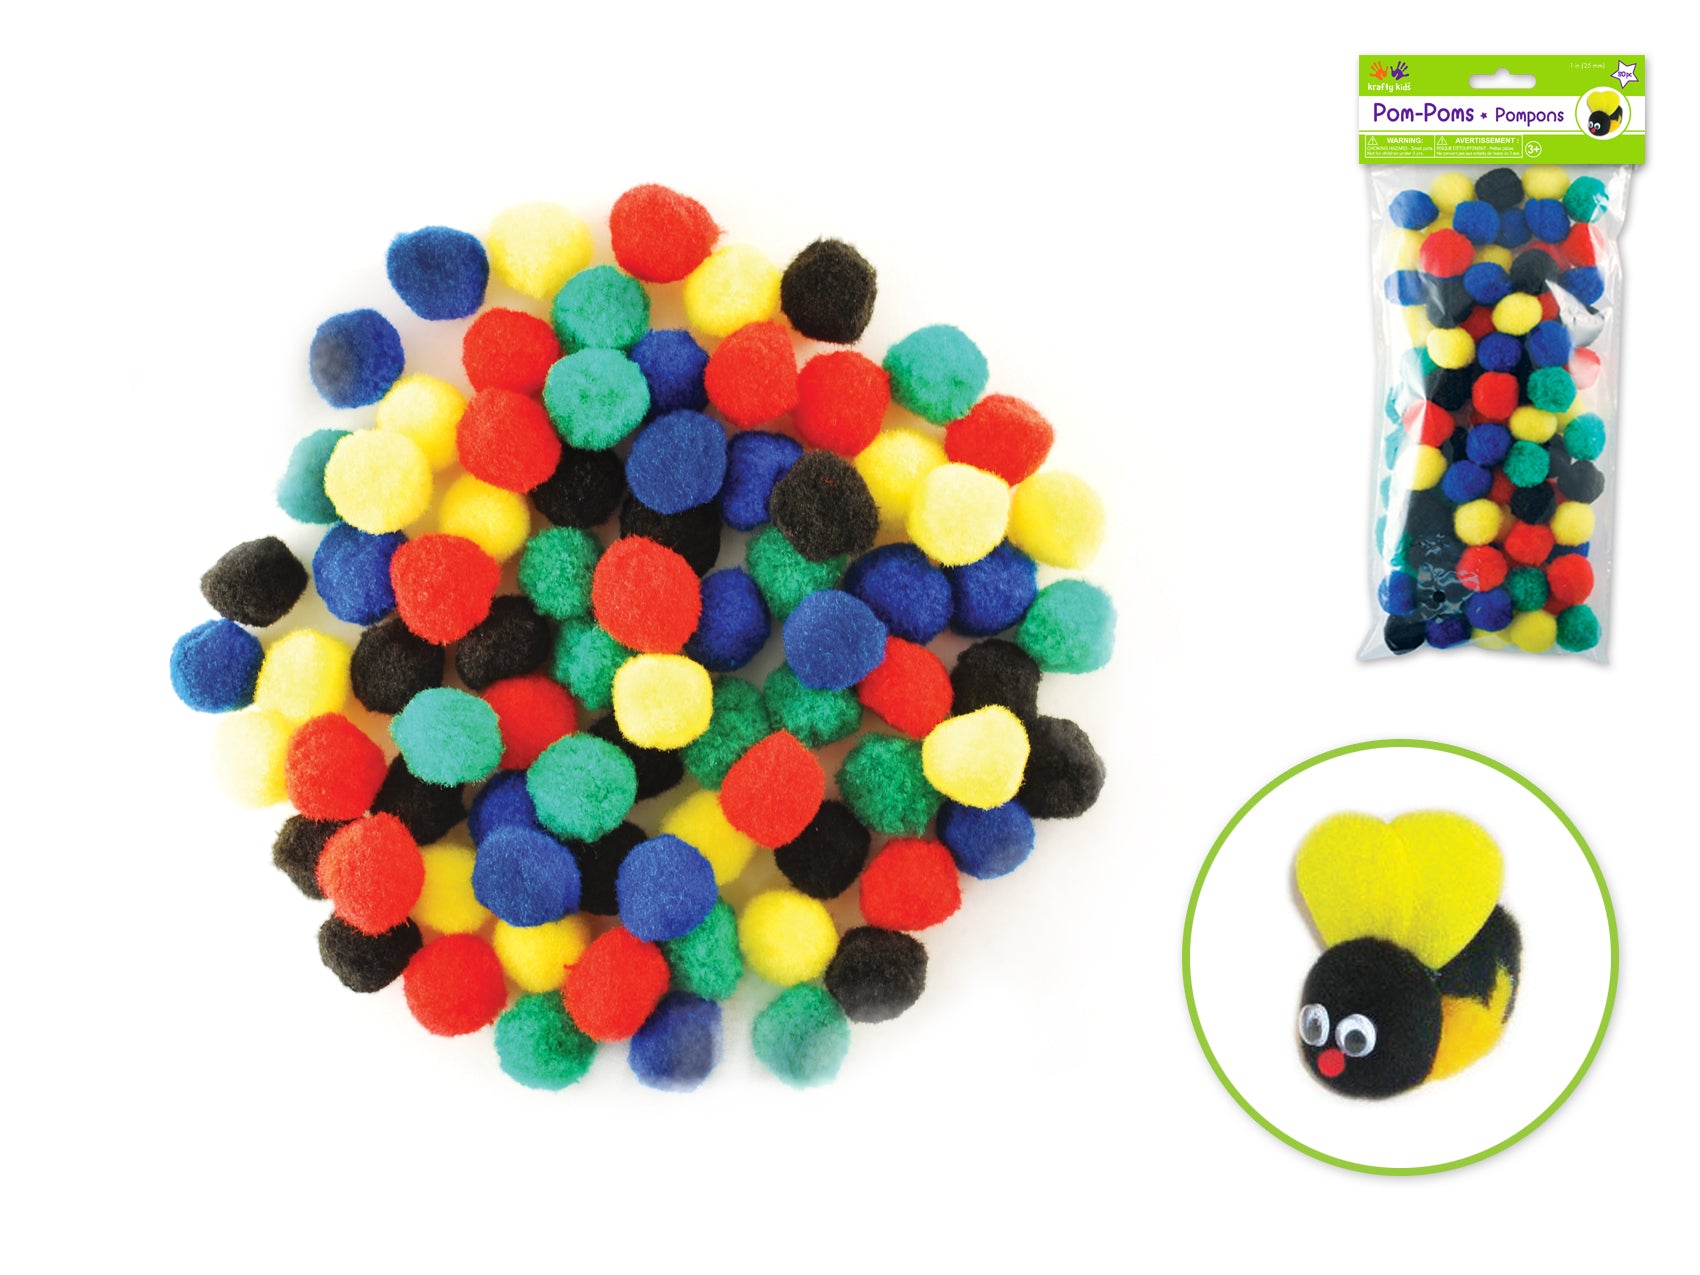 Krafty Kids: Assorted Primary Colors 1" (25mm) Pom-Poms, Pack of 80